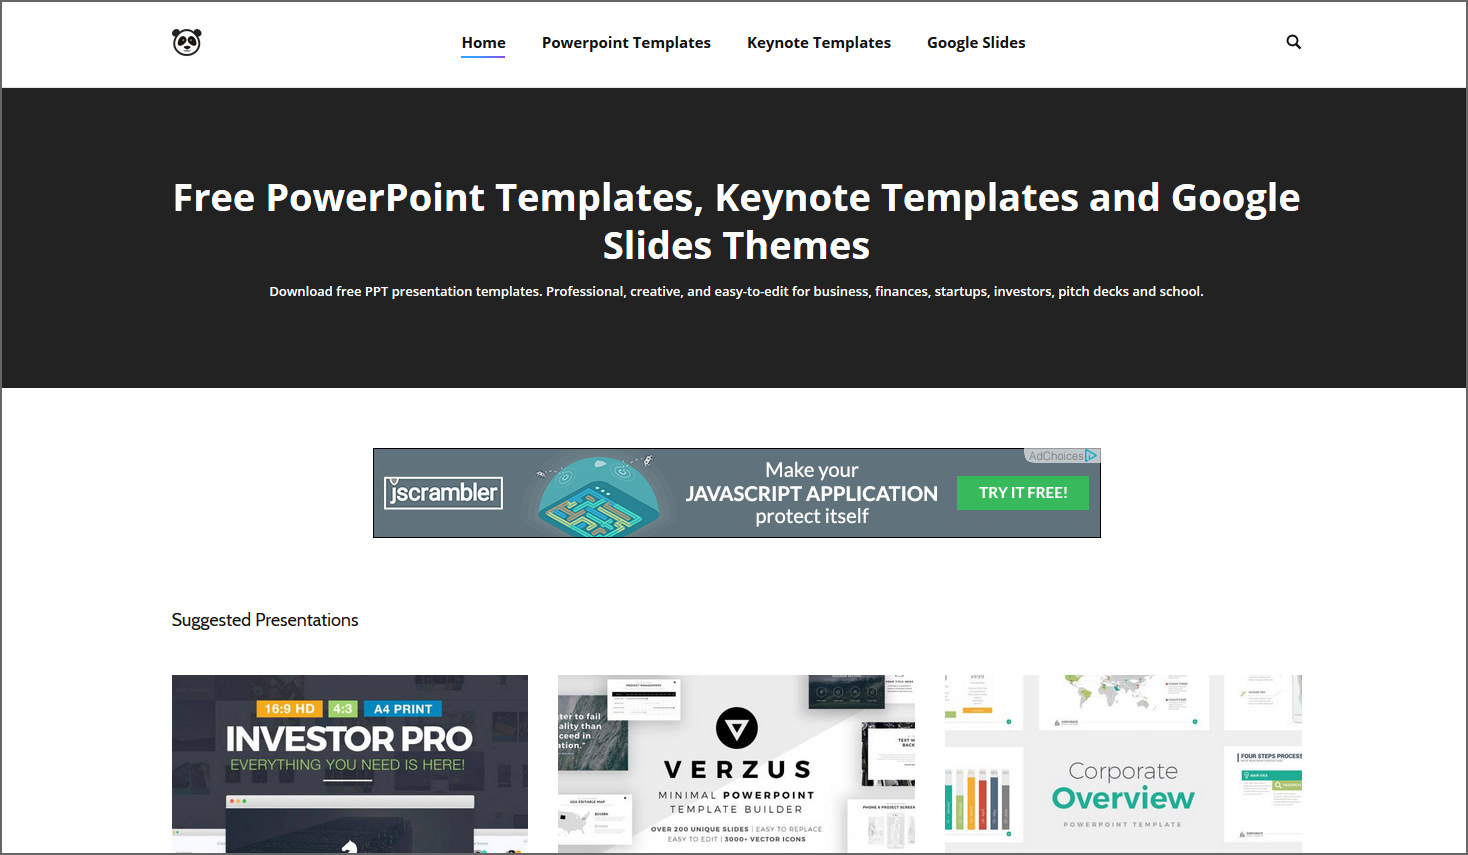 4 Sites With Free Beautiful PowerPoint Templates, Keynotes ...